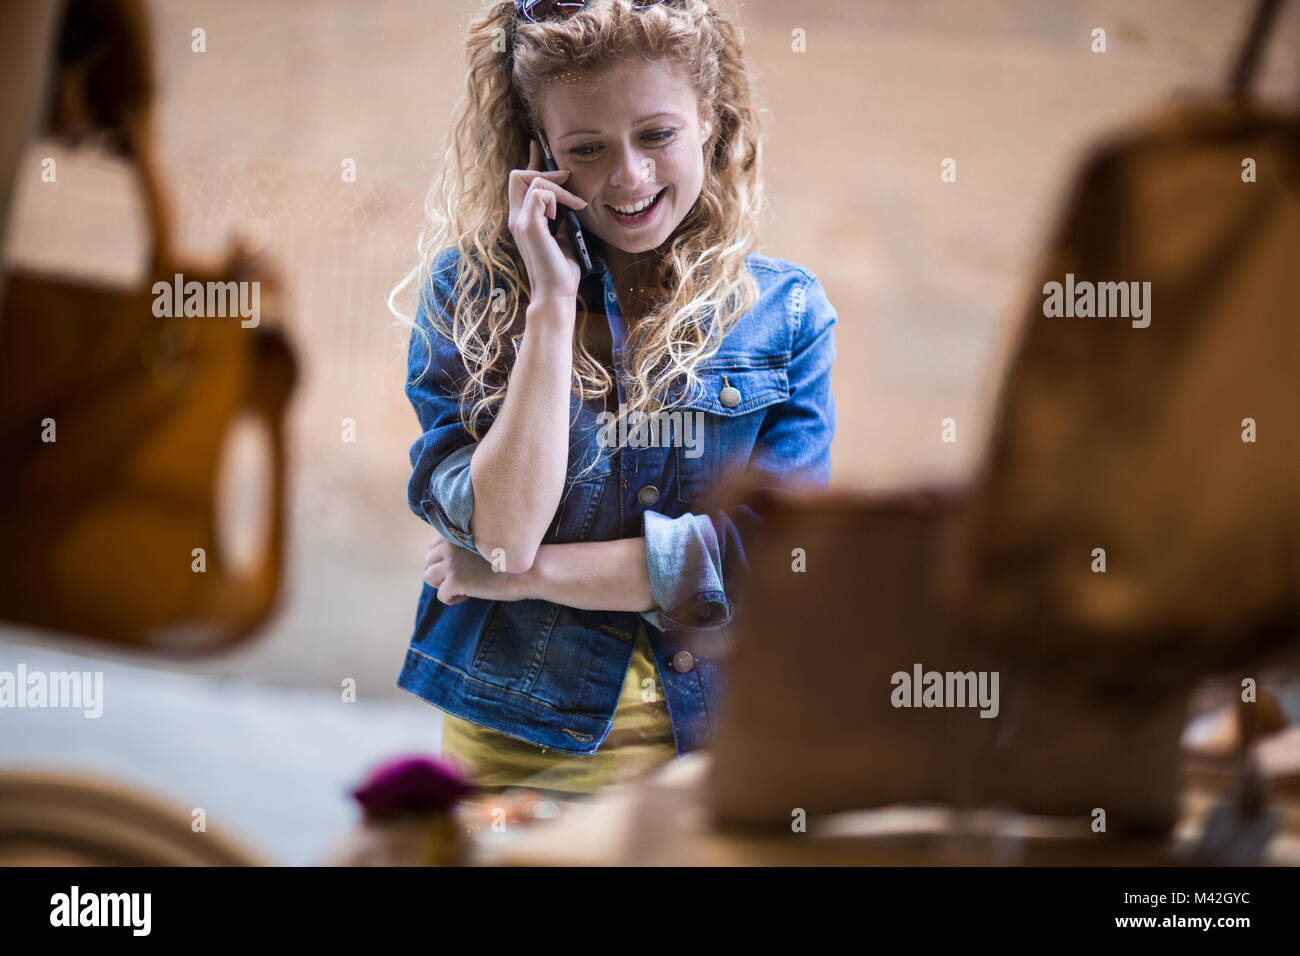 Young female window shopping and on phone Stock Photo